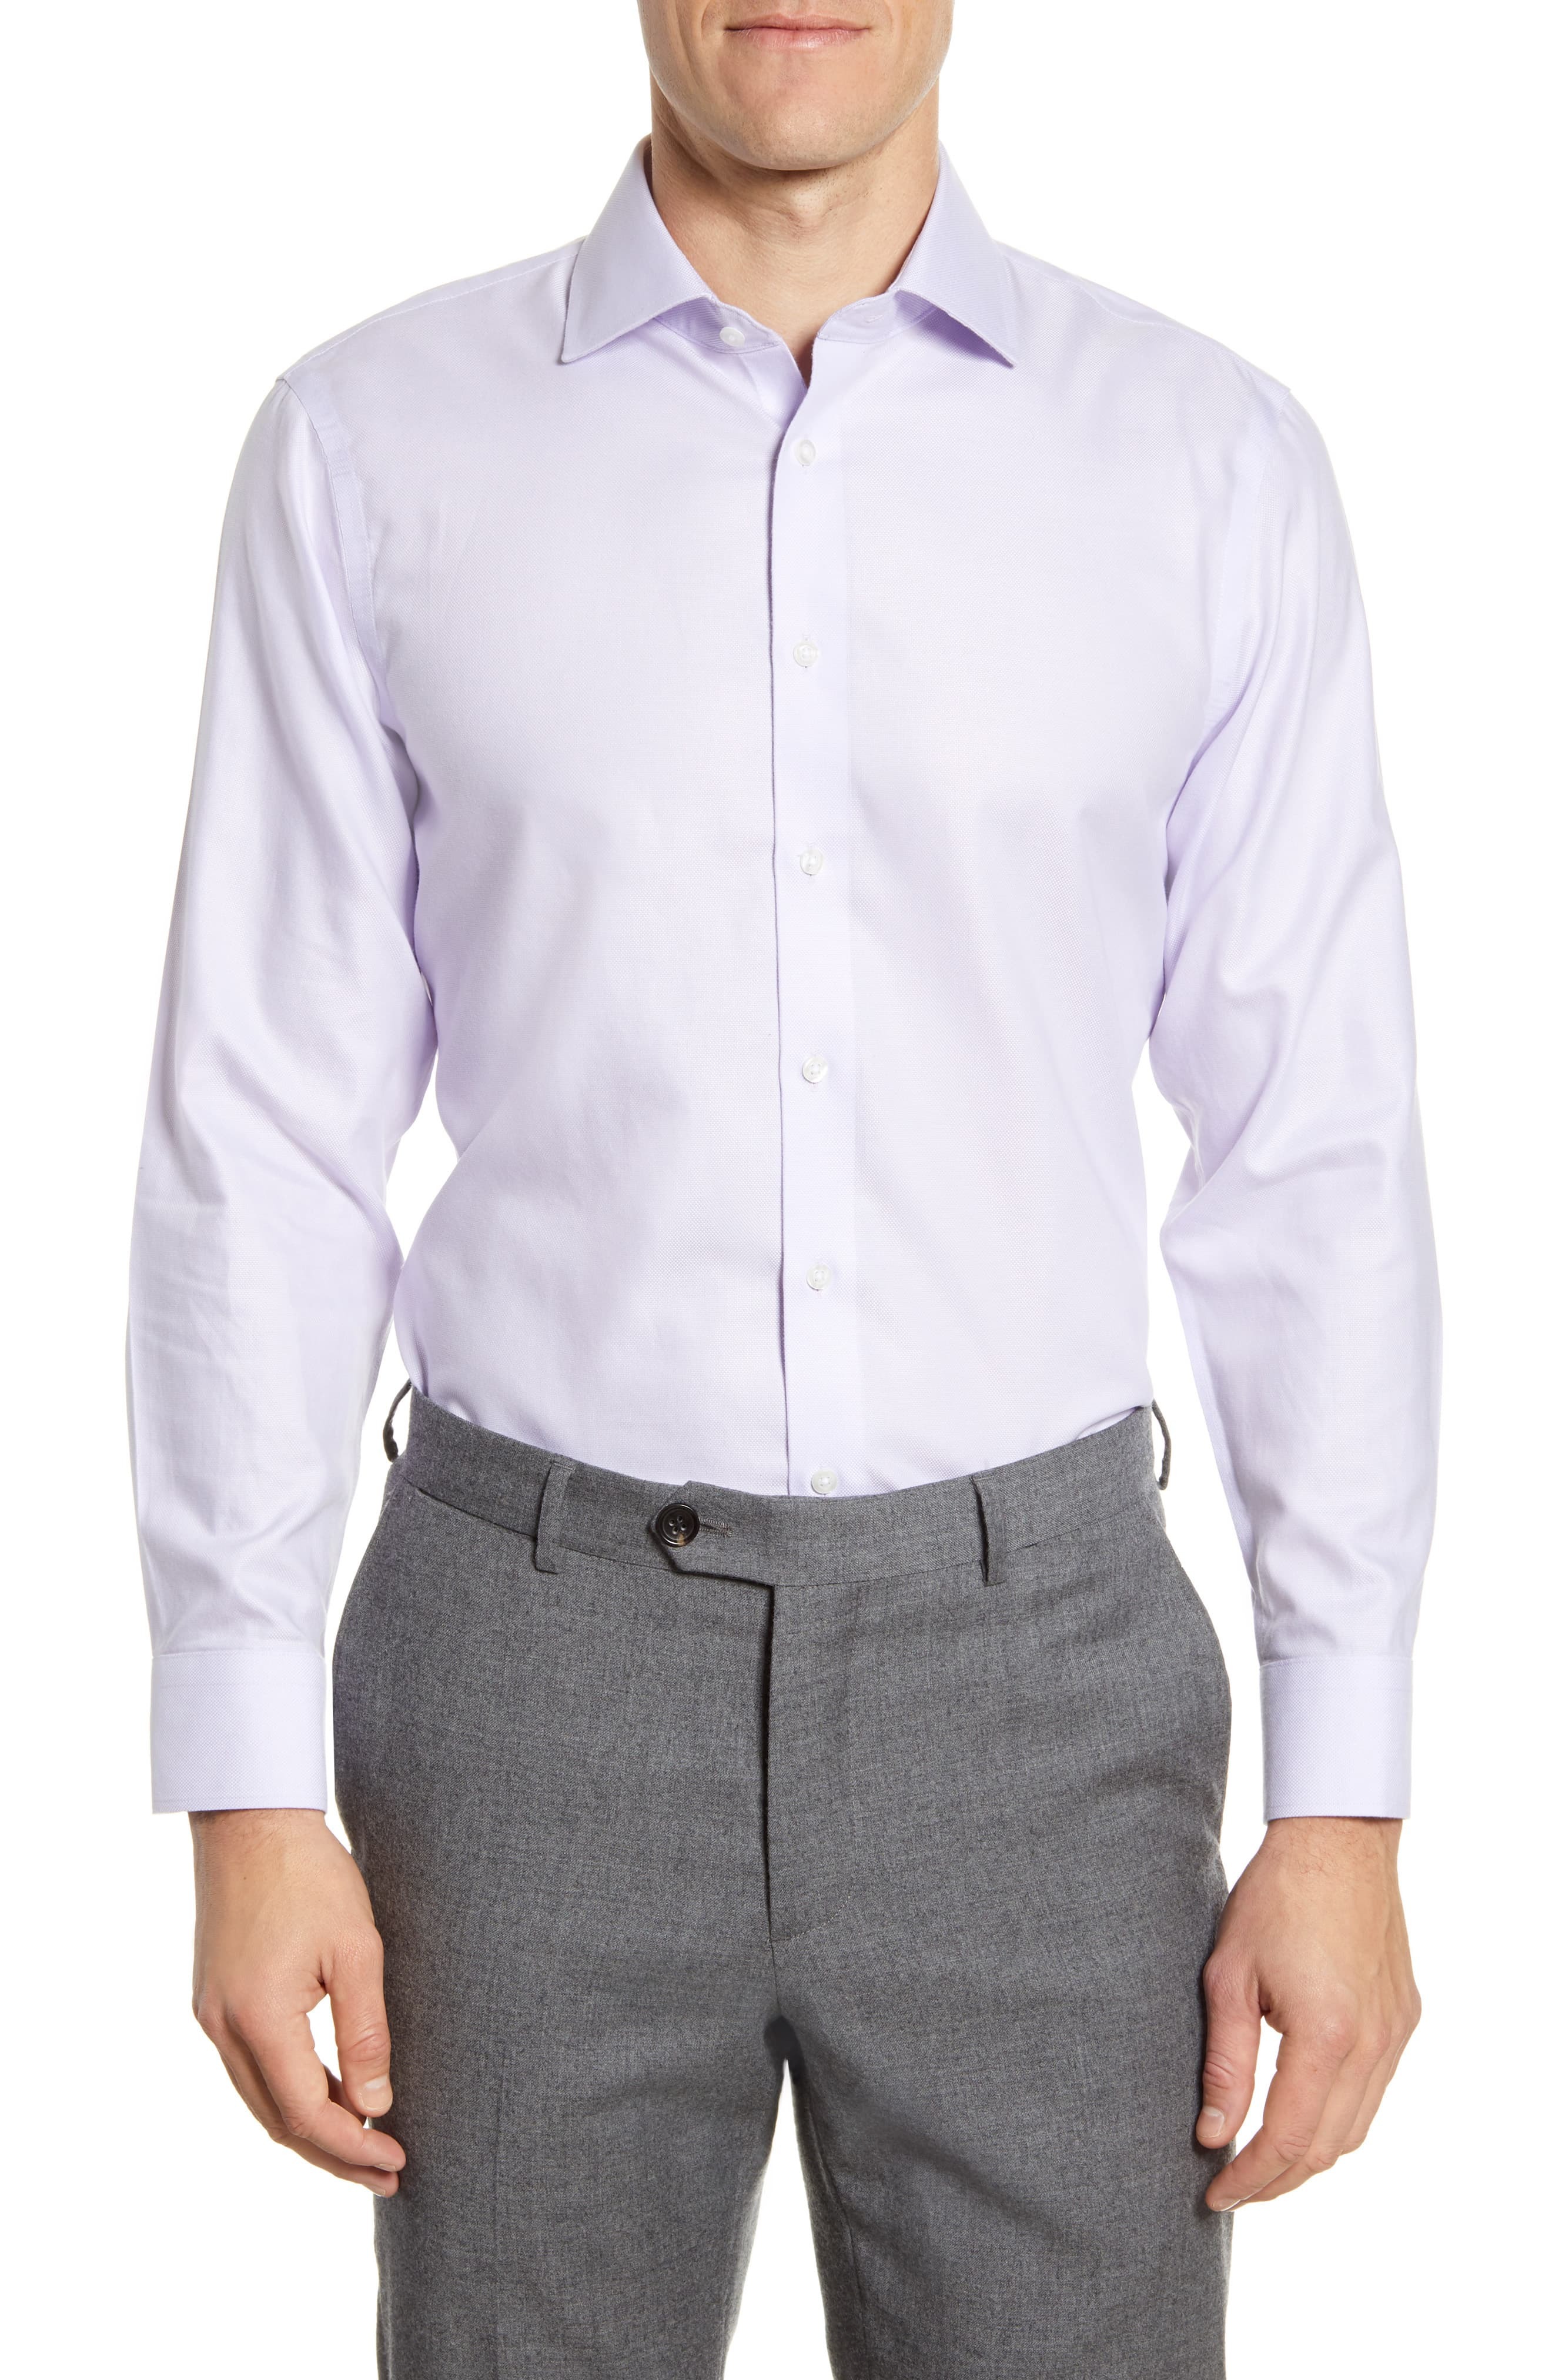 The Tie Bar Trim Fit Solid Textured Dress Shirt, $27 | Nordstrom ...